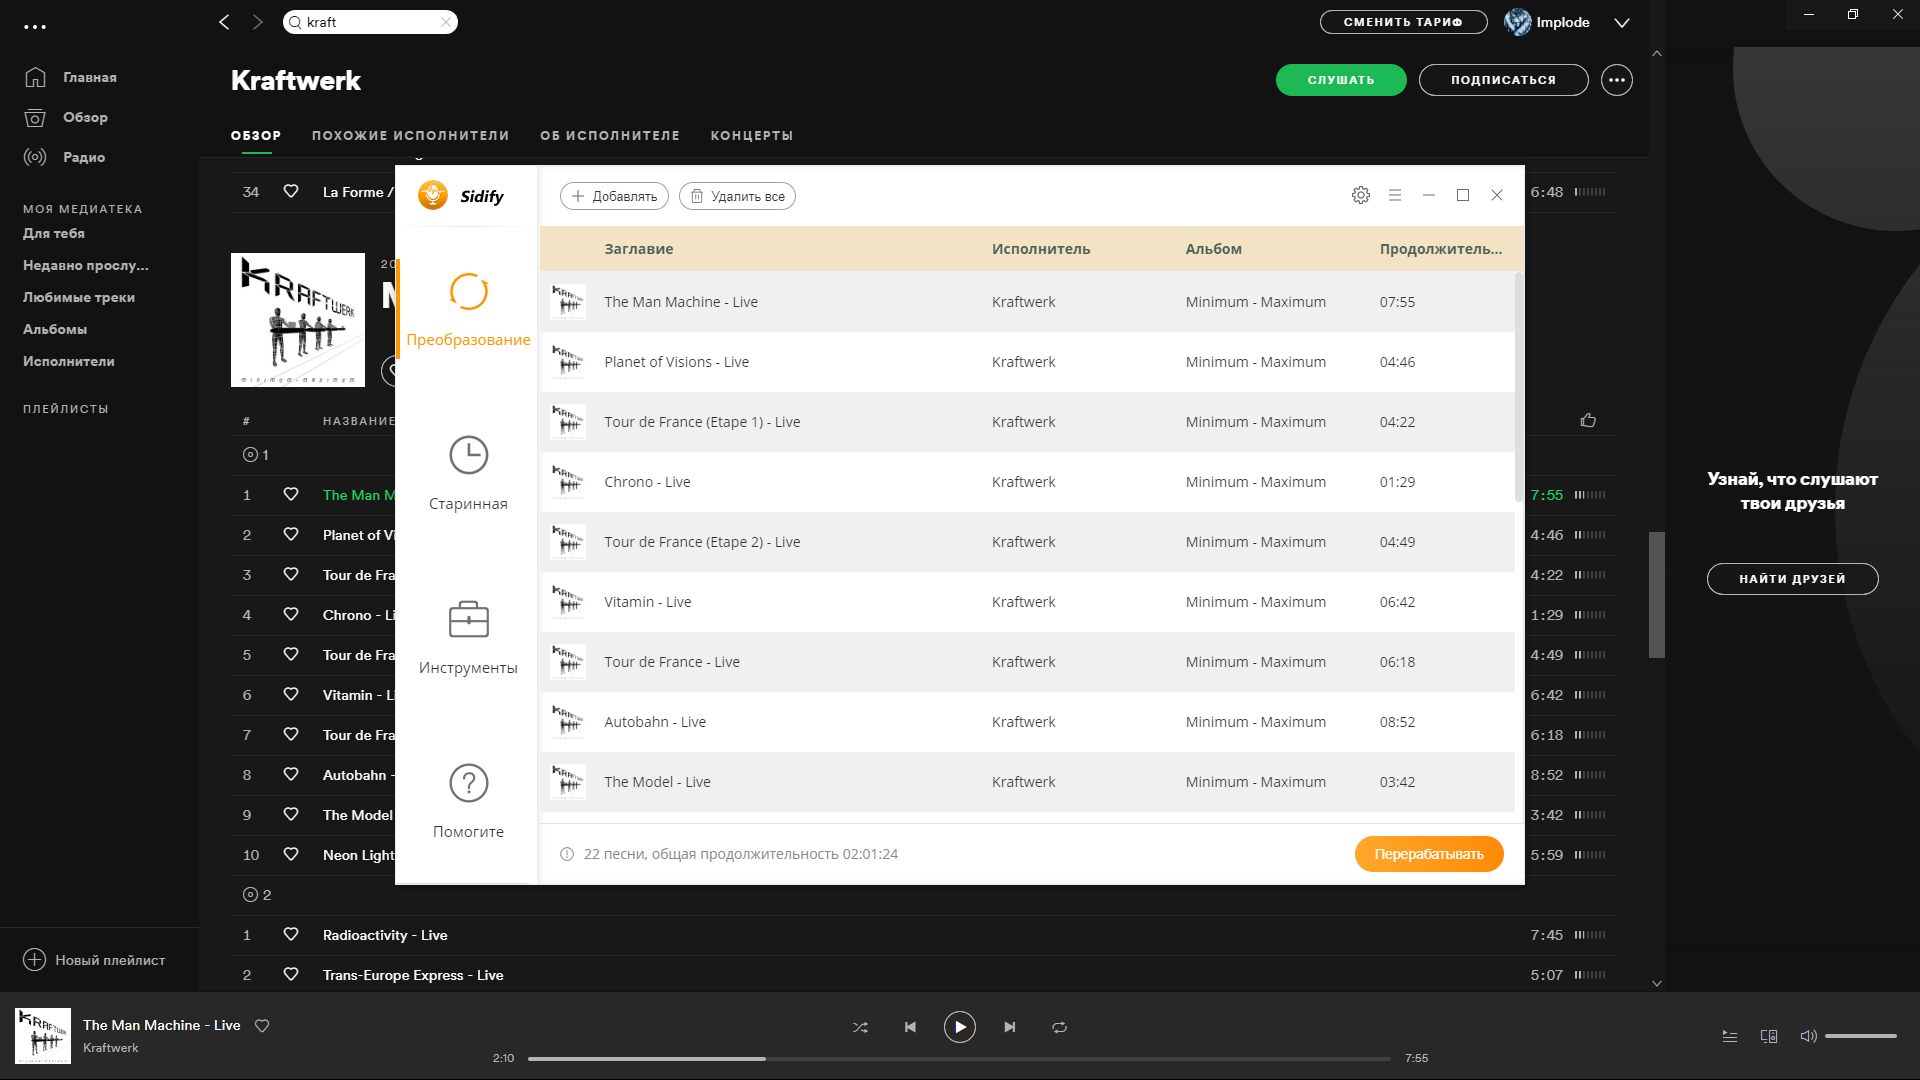 spotify music converter for windows